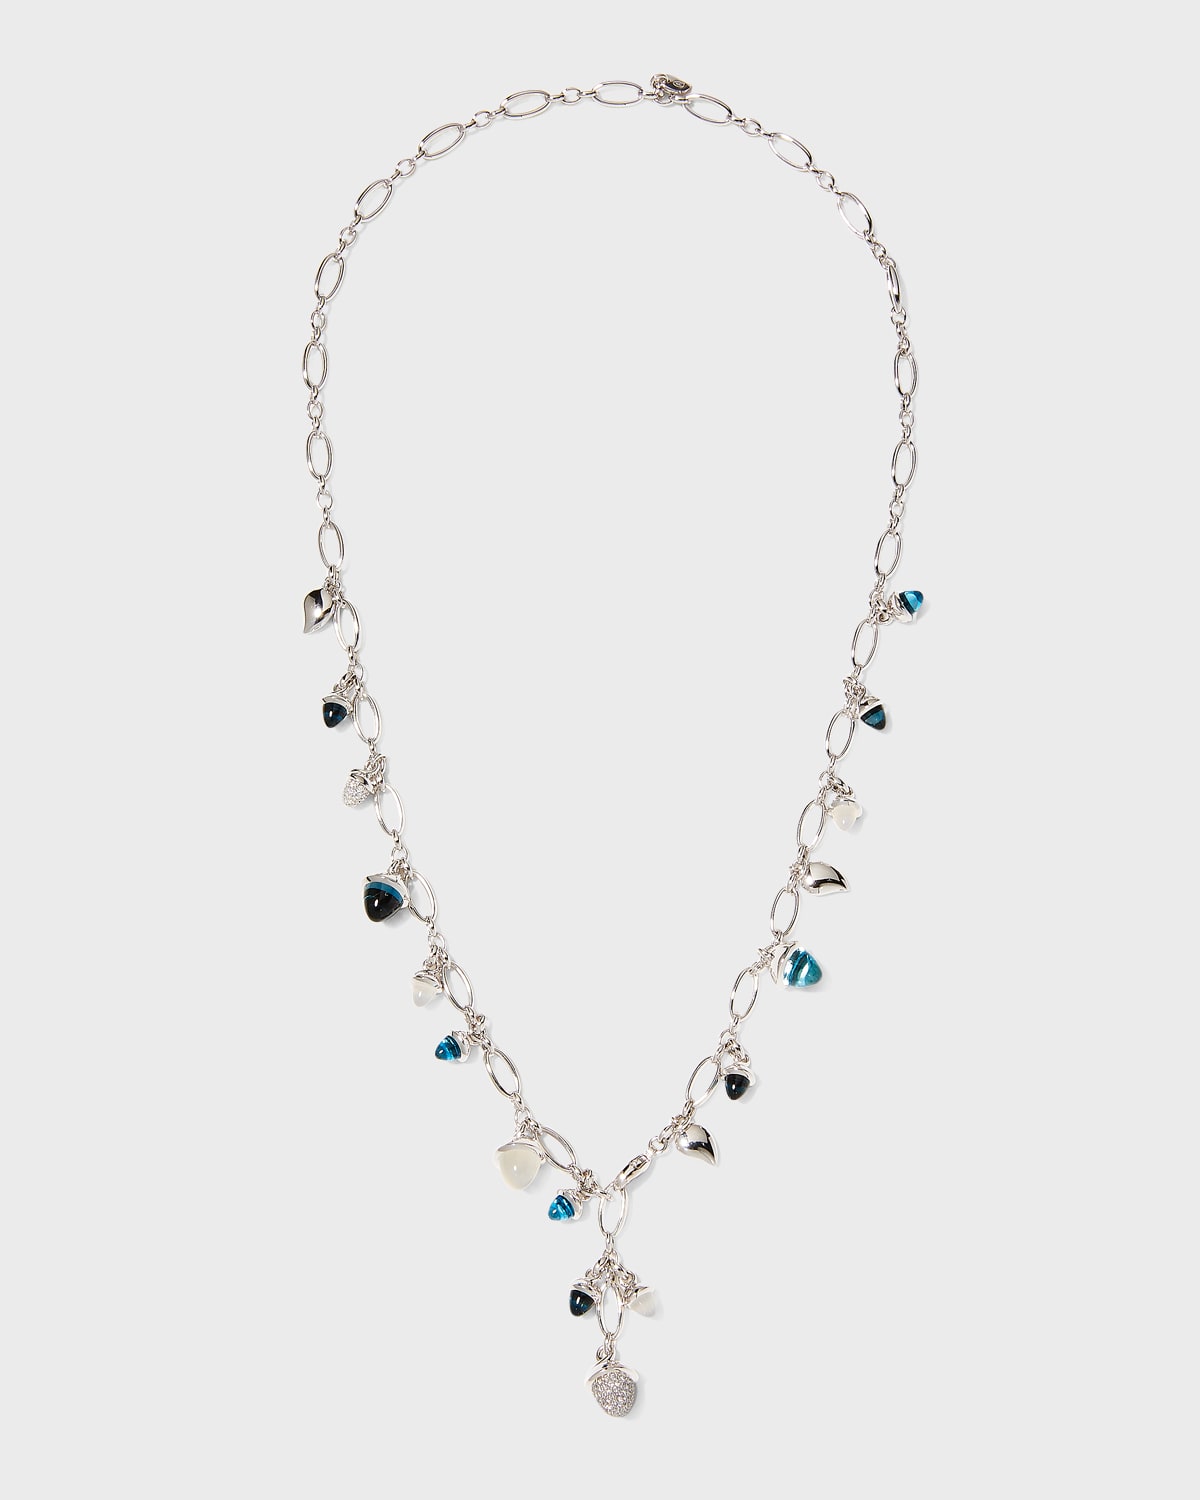 White Gold Mikado Necklace with Moonstone and Topaz